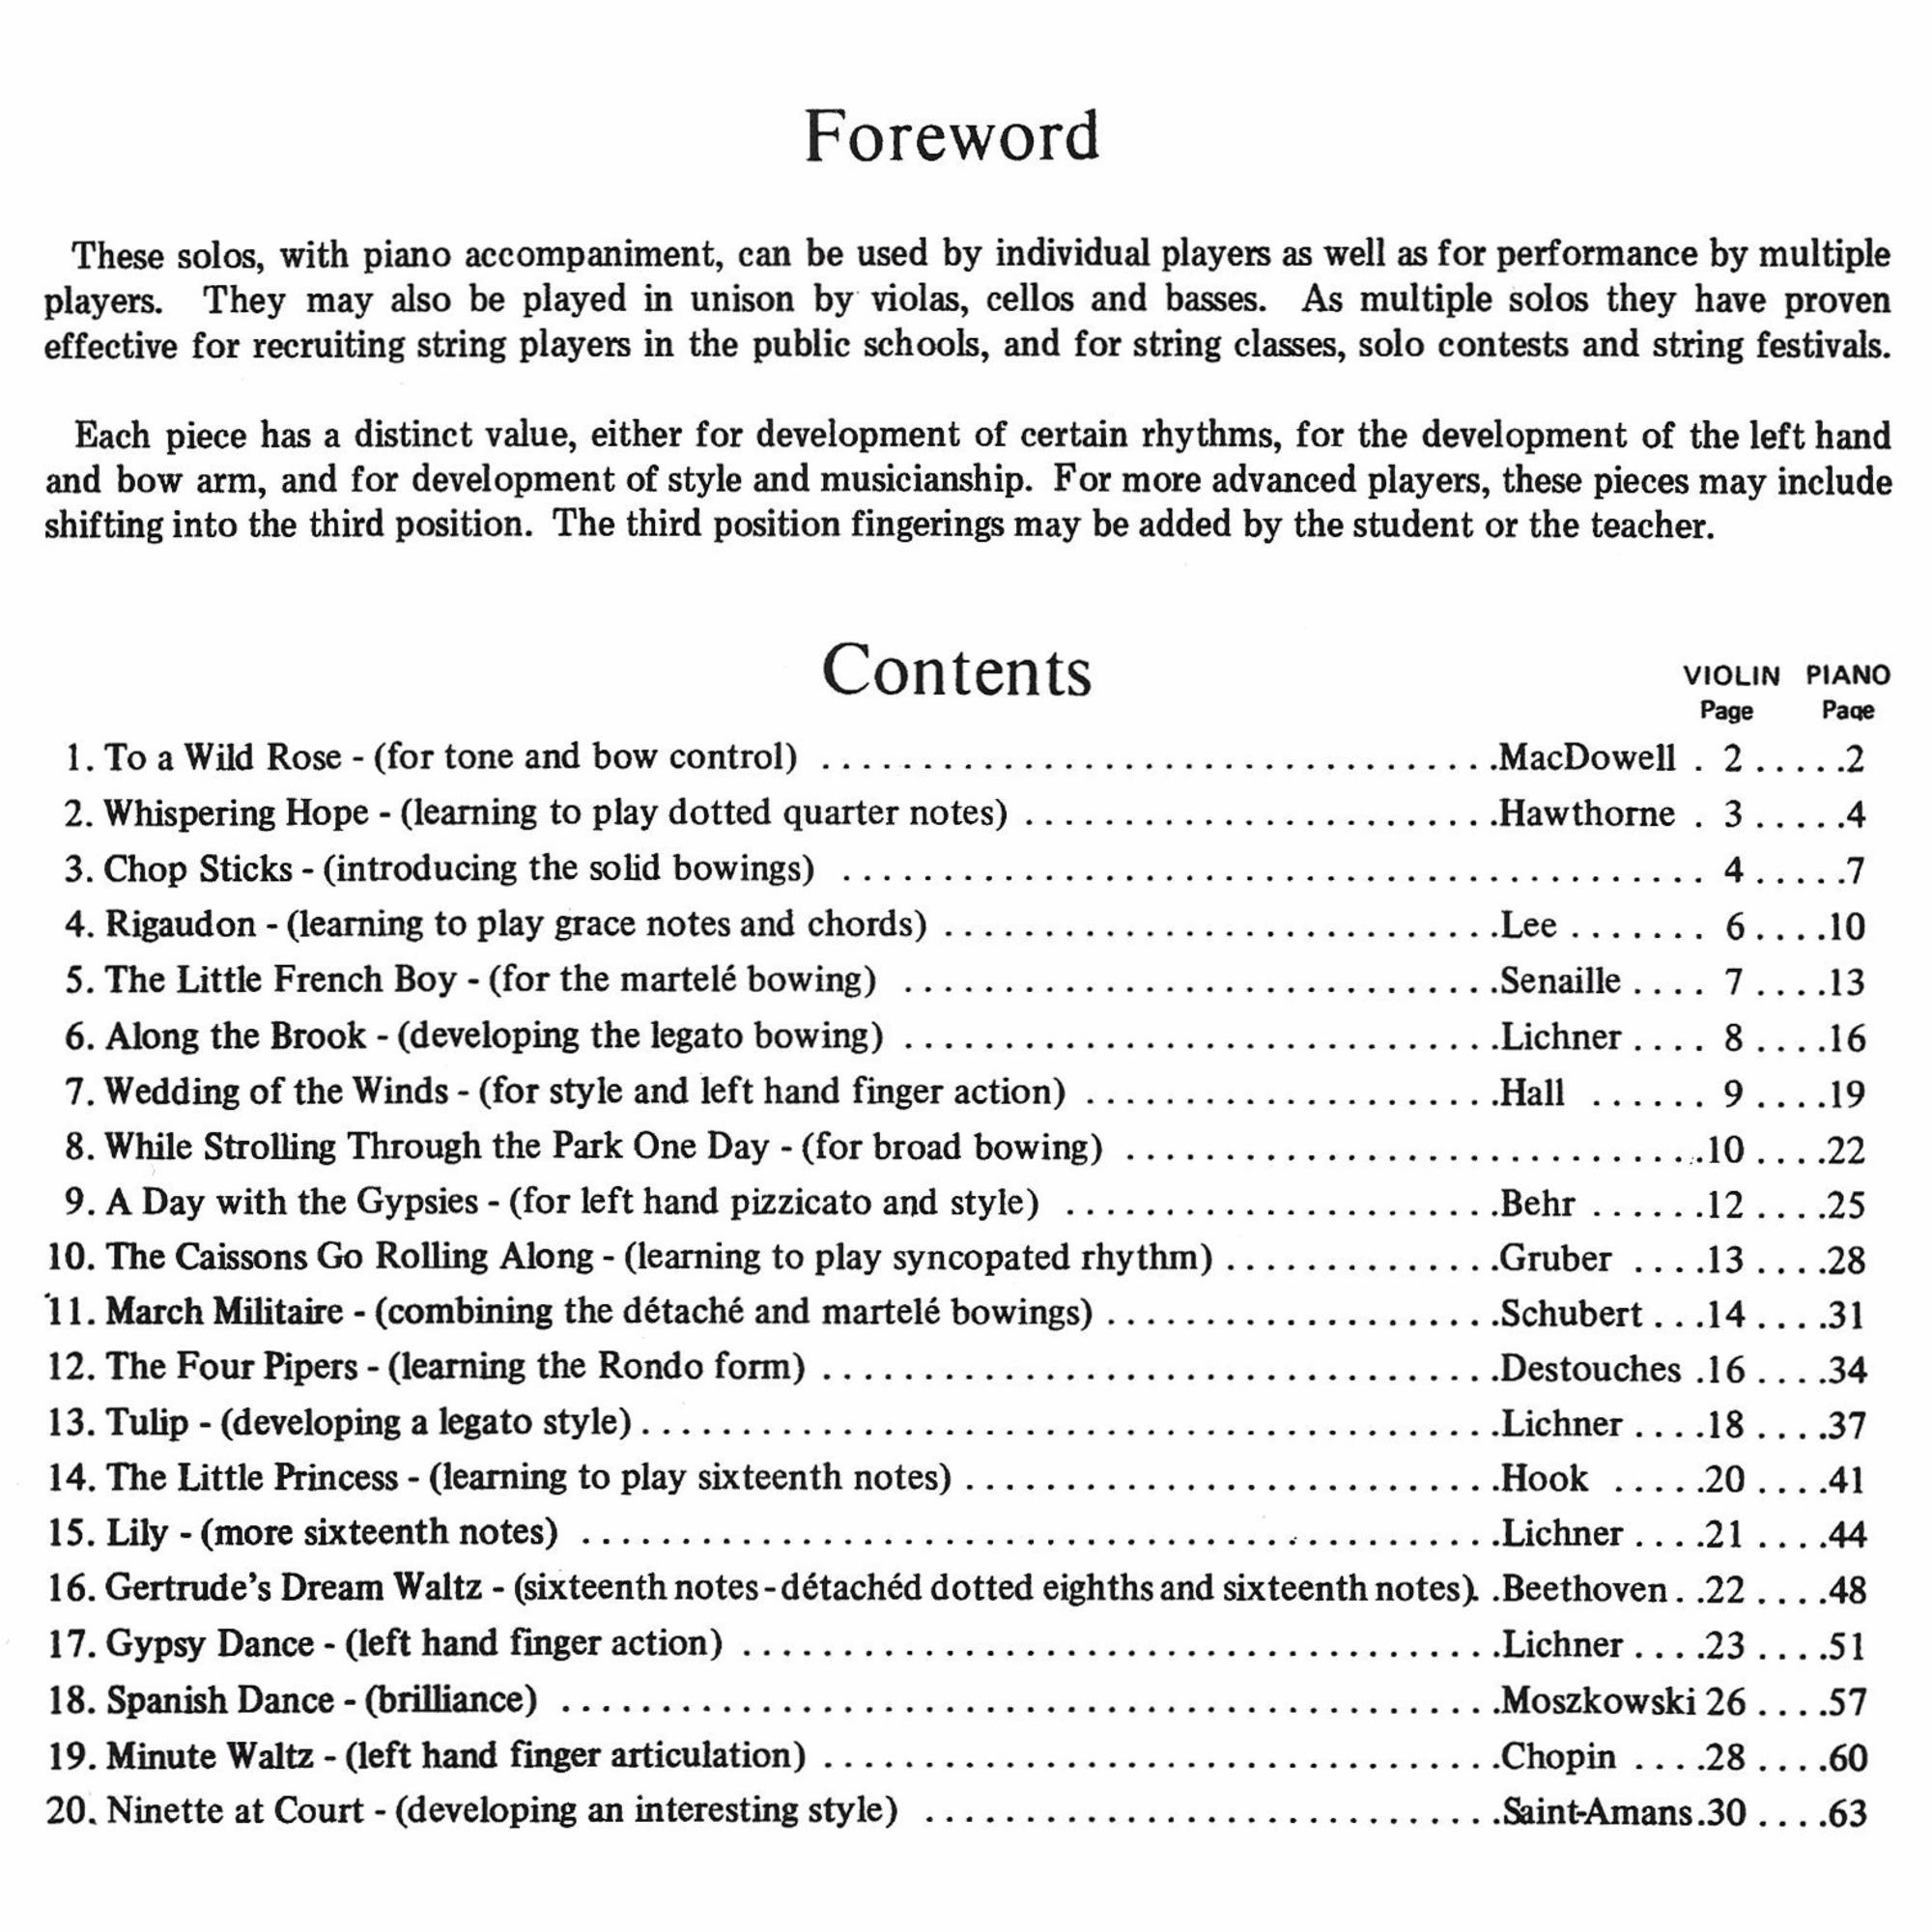 Foreword/Contents